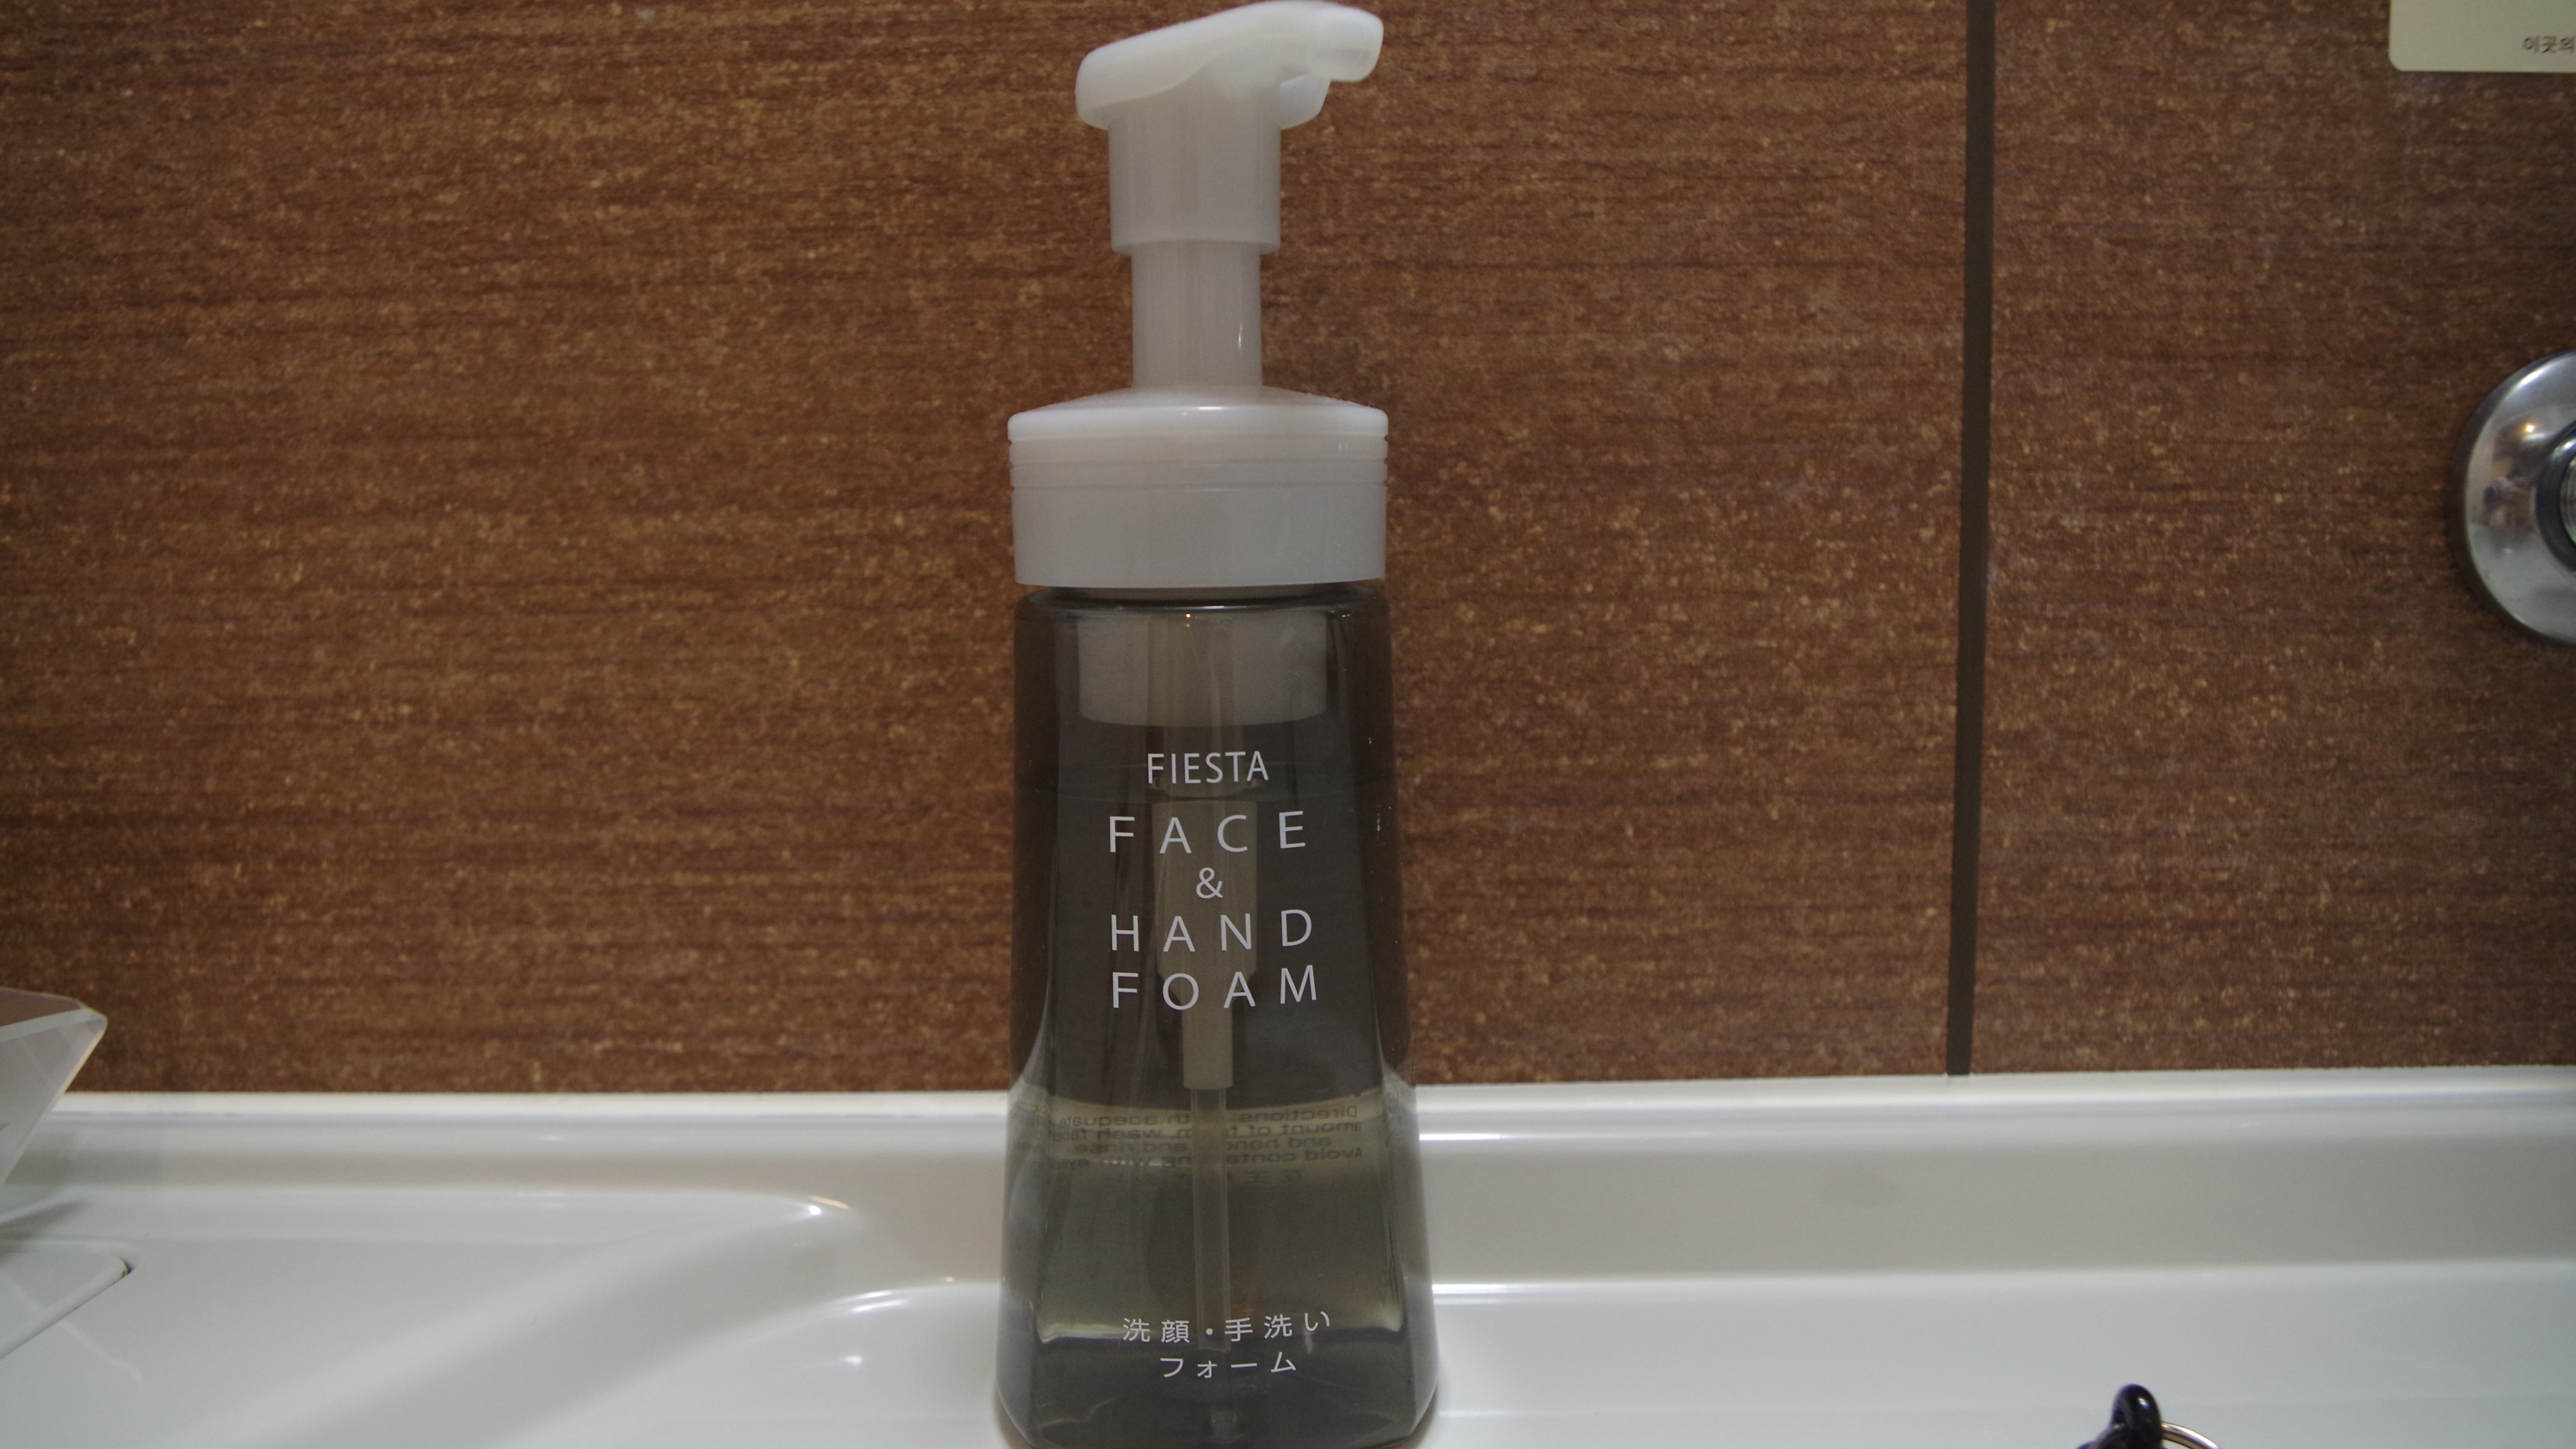 [All rooms are fully equipped] It can be used not only for hand washing and face washing, but also as a shaving foam.